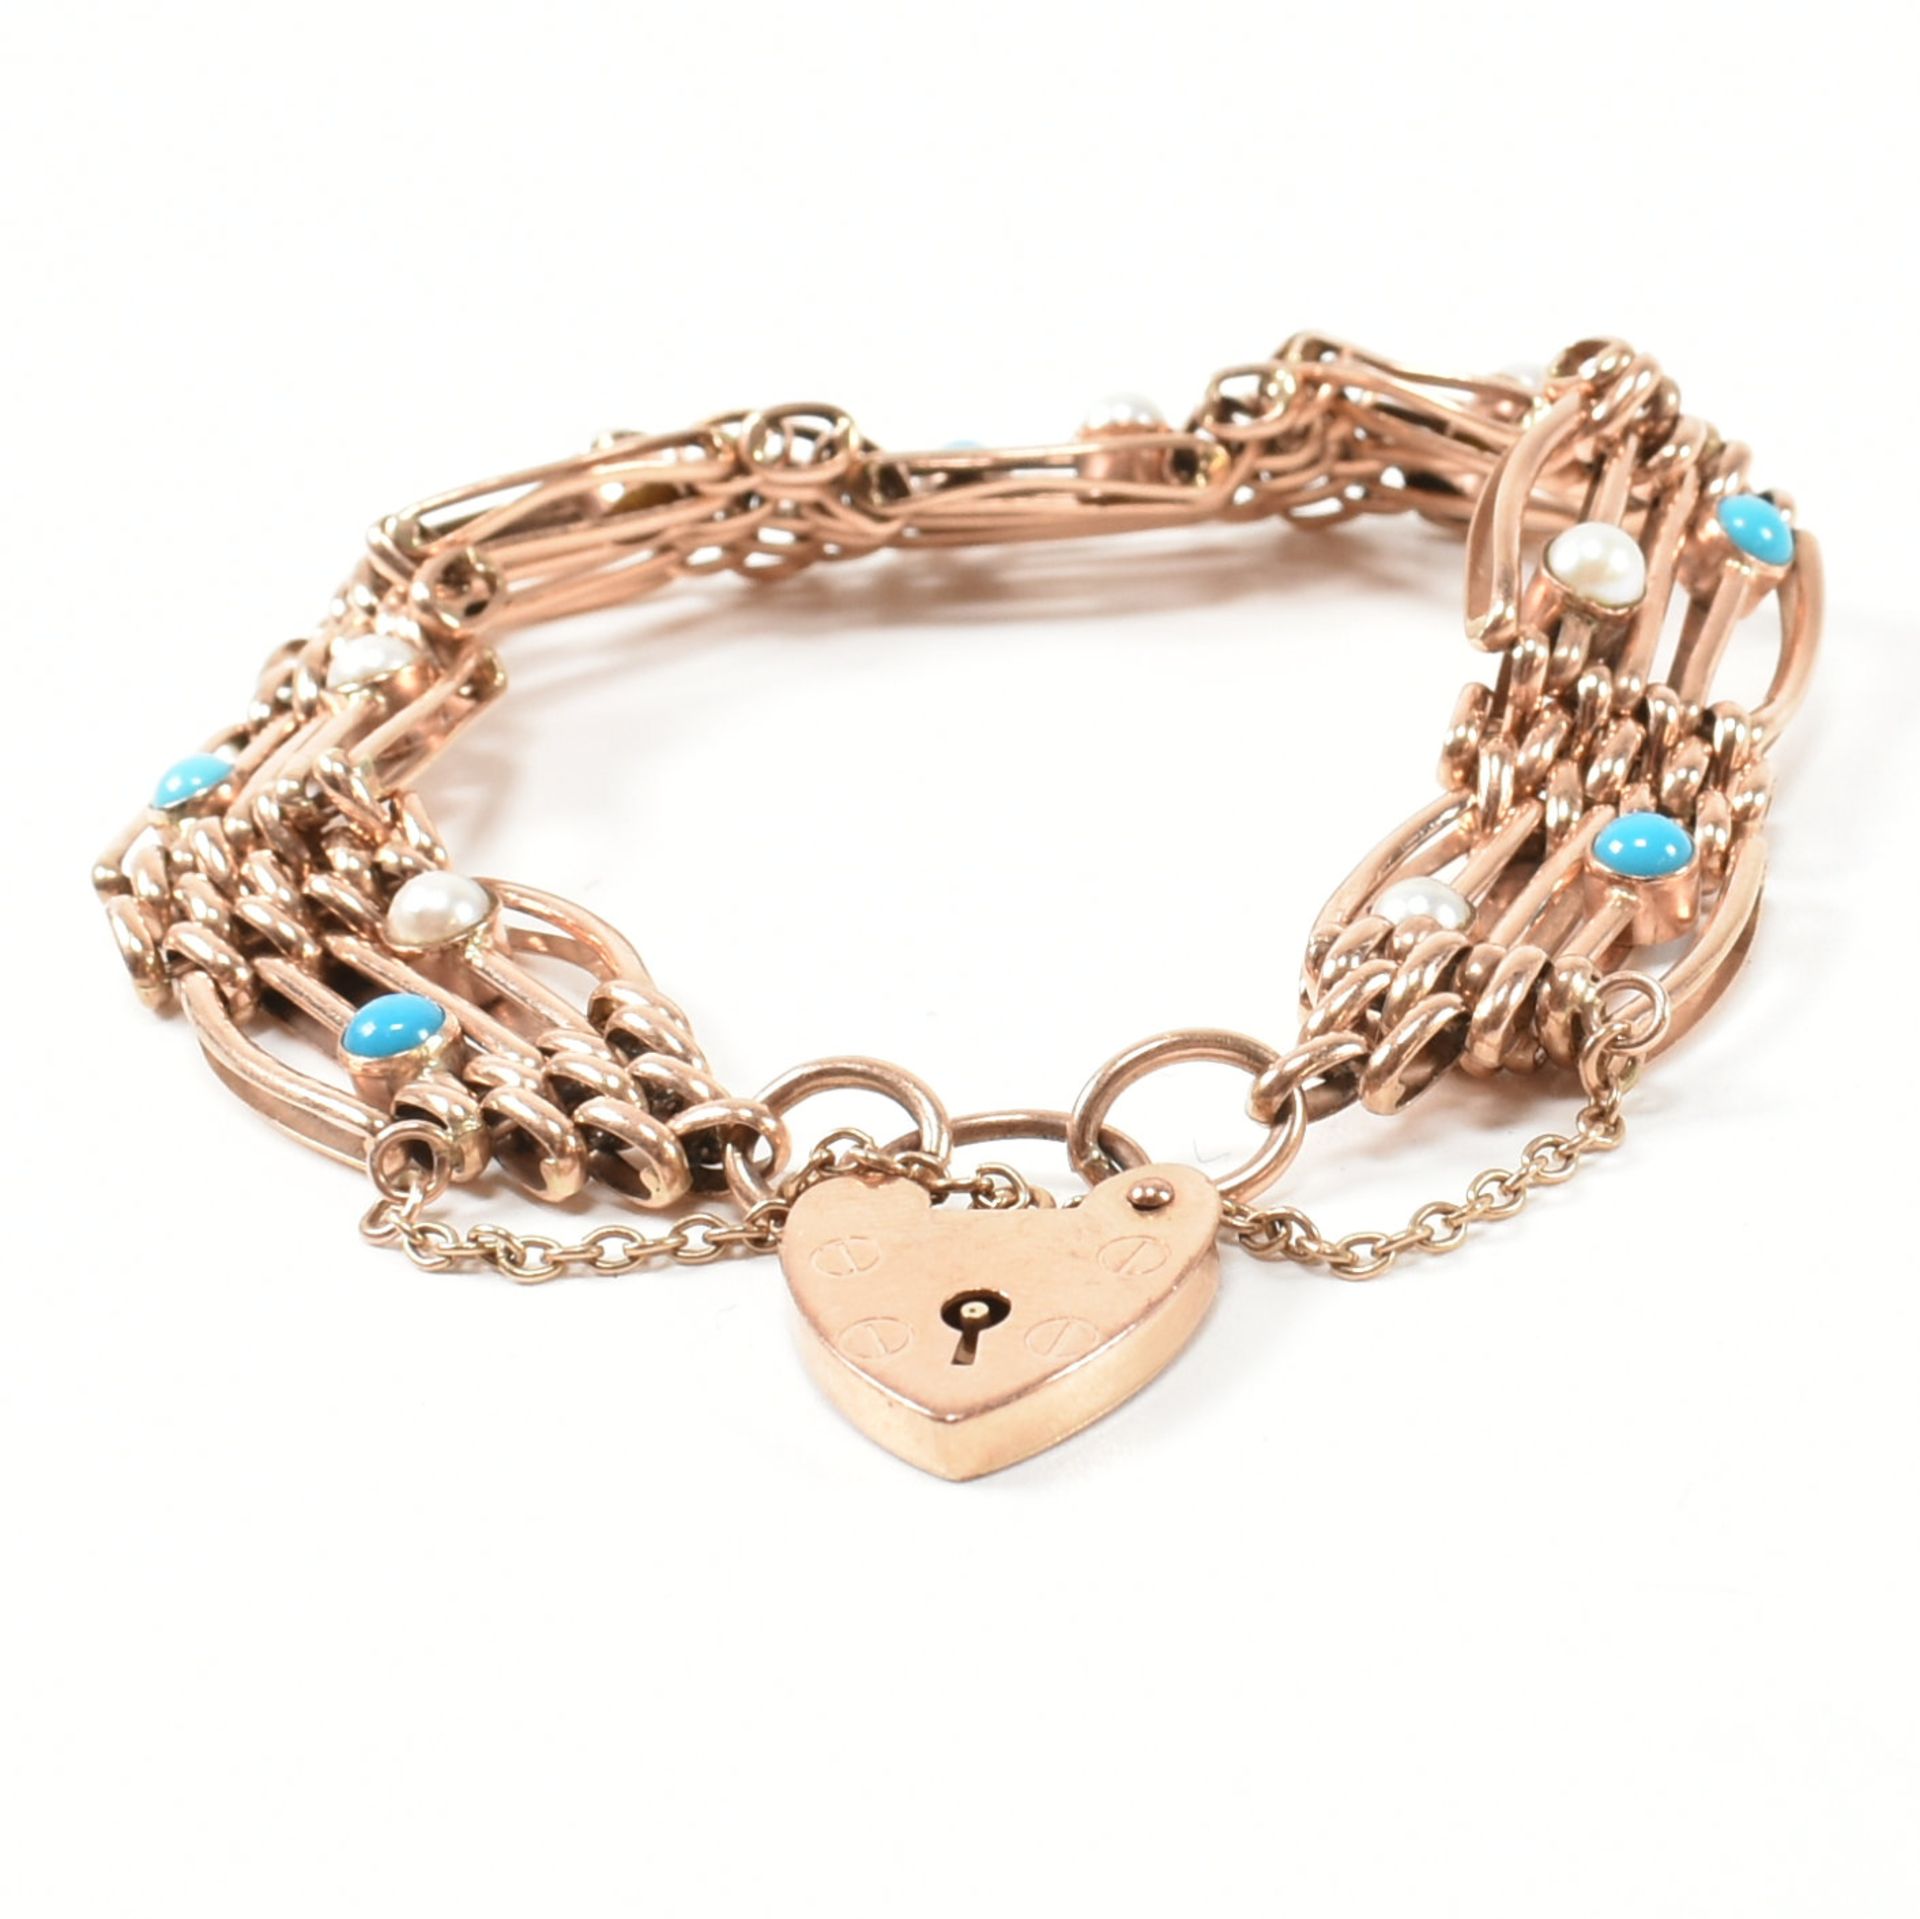 HALLMARKED 9CT ROSE GOLD PEARL & TURQUOISE GATE LINK BRACELET - Image 2 of 9